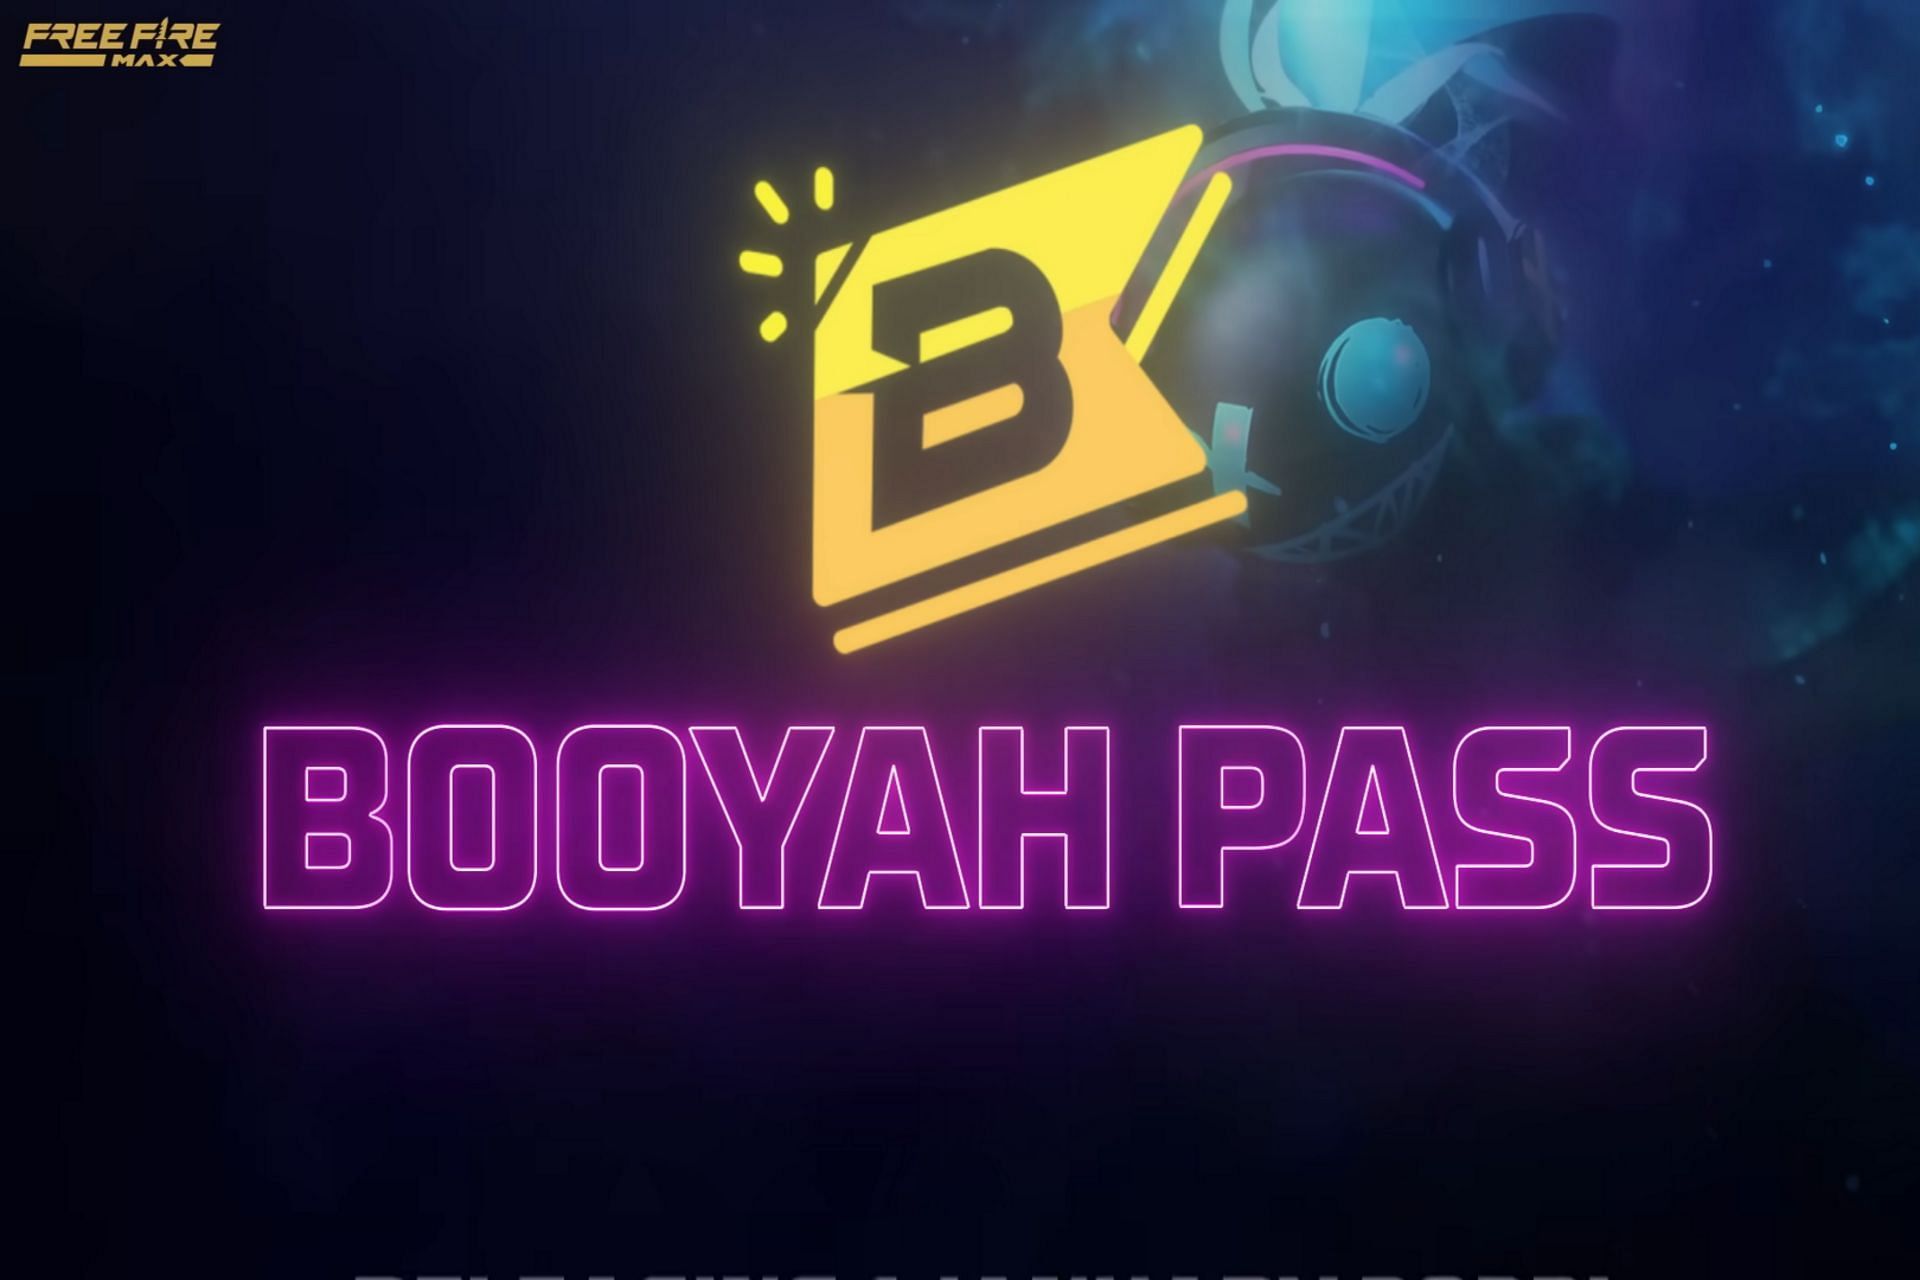 New Free Fire MAX Booyah Pass officially announced